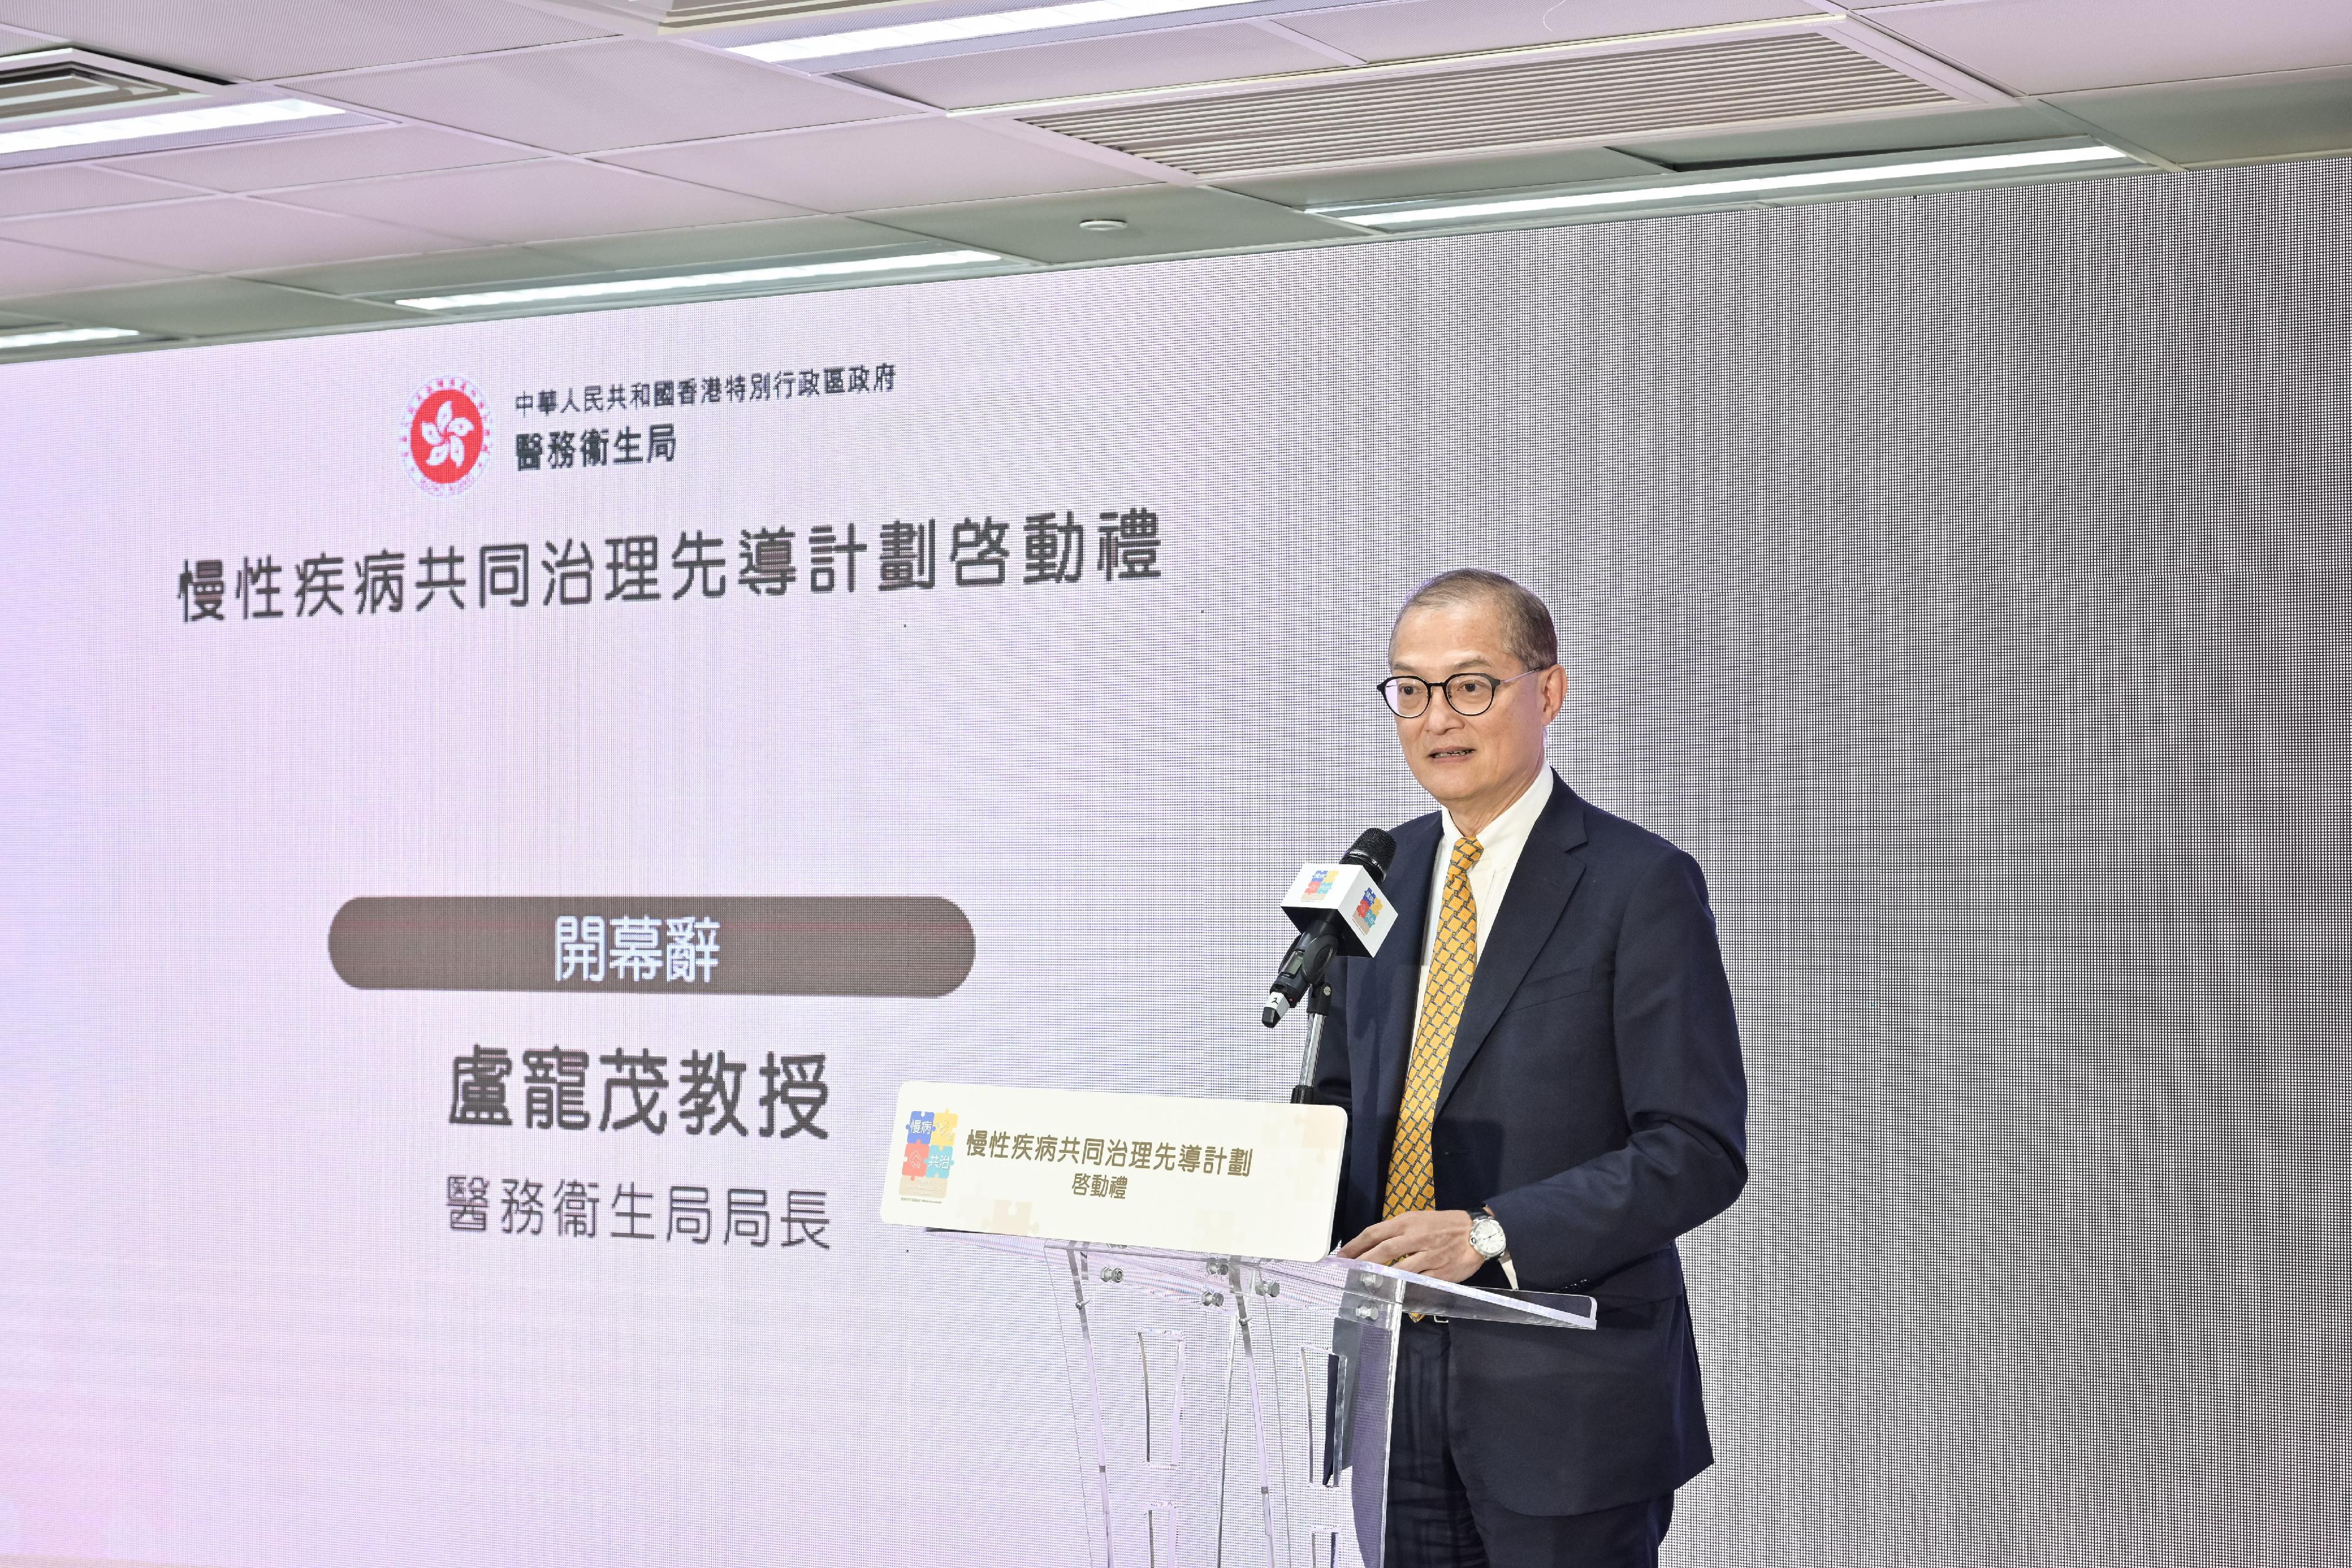 The Secretary for Health, Professor Lo Chung-mau, calls on eligible citizens to take action in commencing a healthy life journey by participating in the Chronic Disease Co-Care Pilot Scheme and pairing with a family doctor, at the Scheme's kick-off ceremony today (November 13).